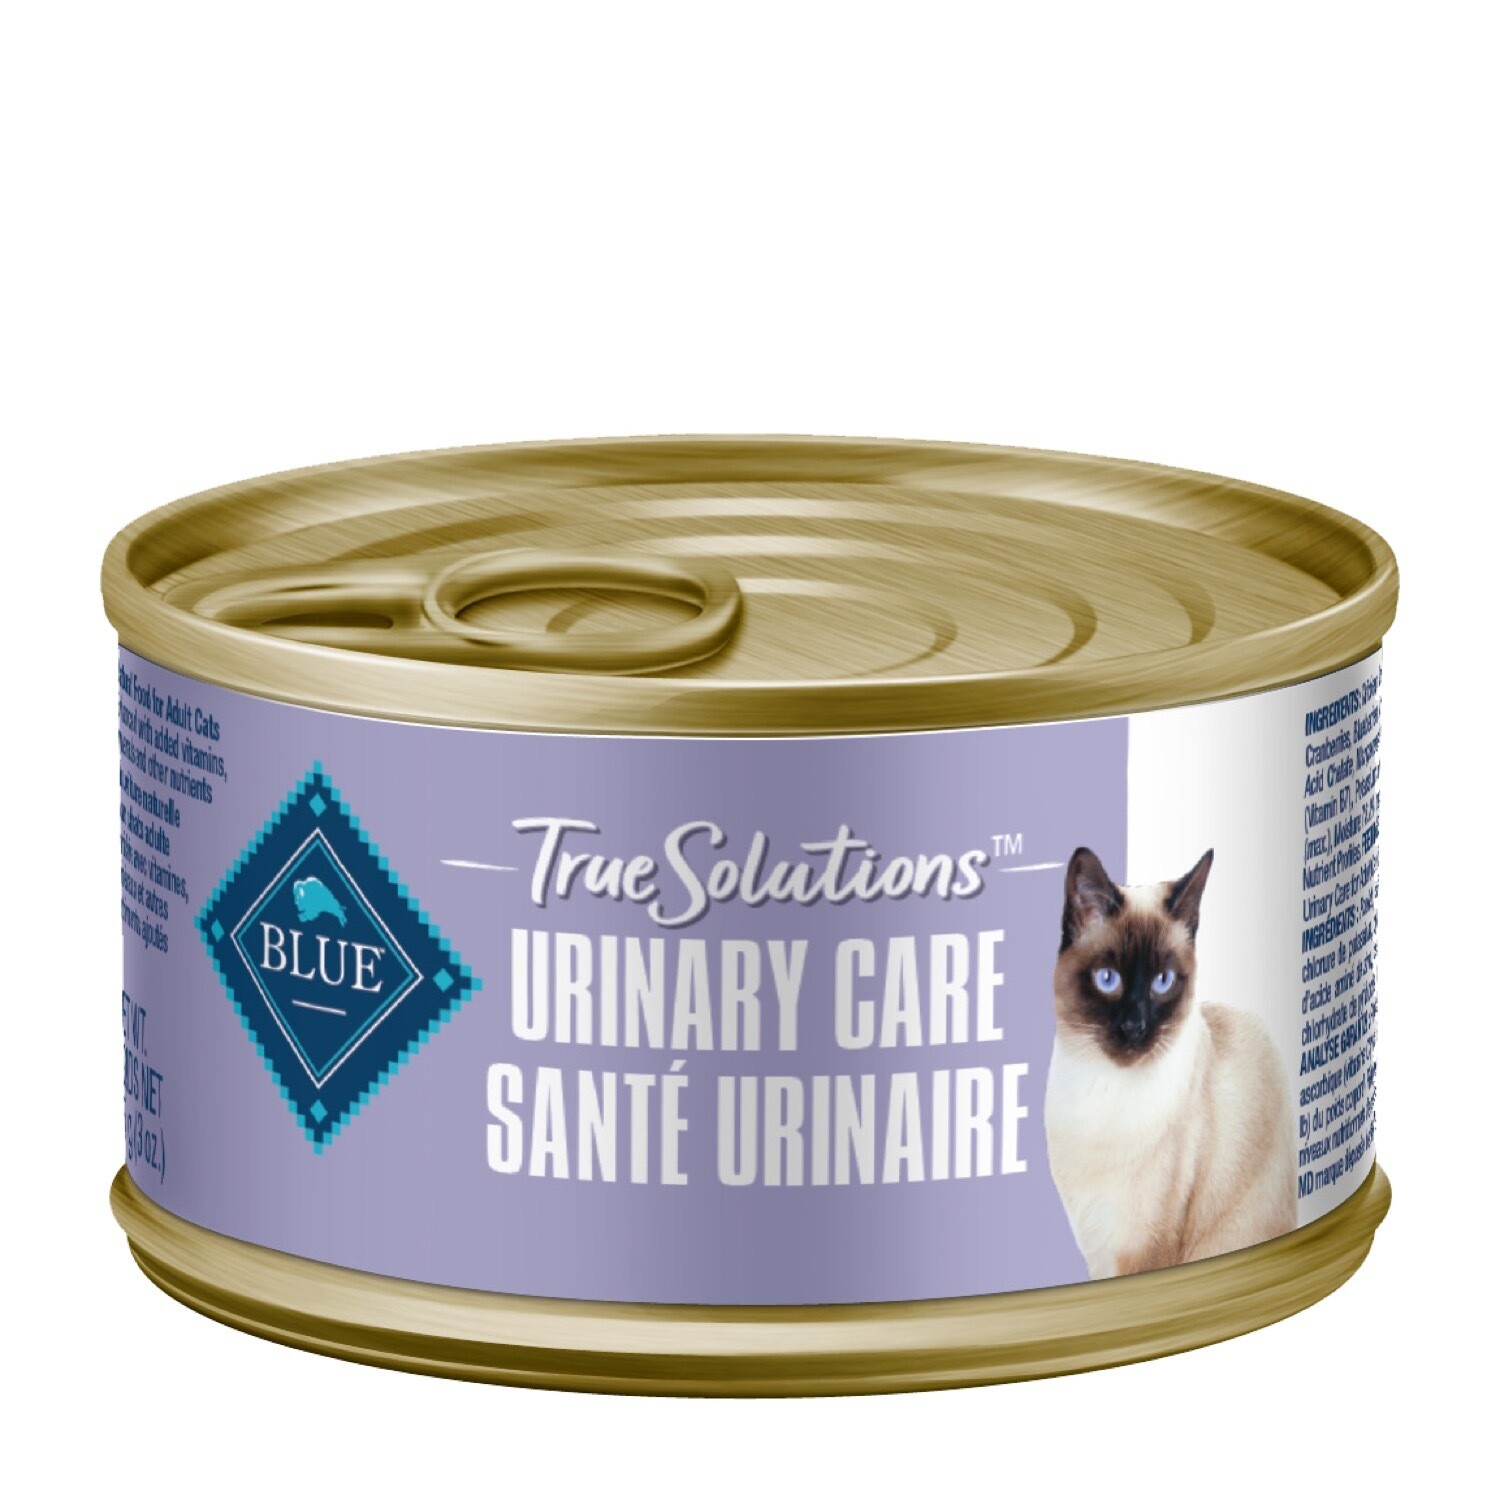 Blue TS Urinary Care Cat Can 5oz